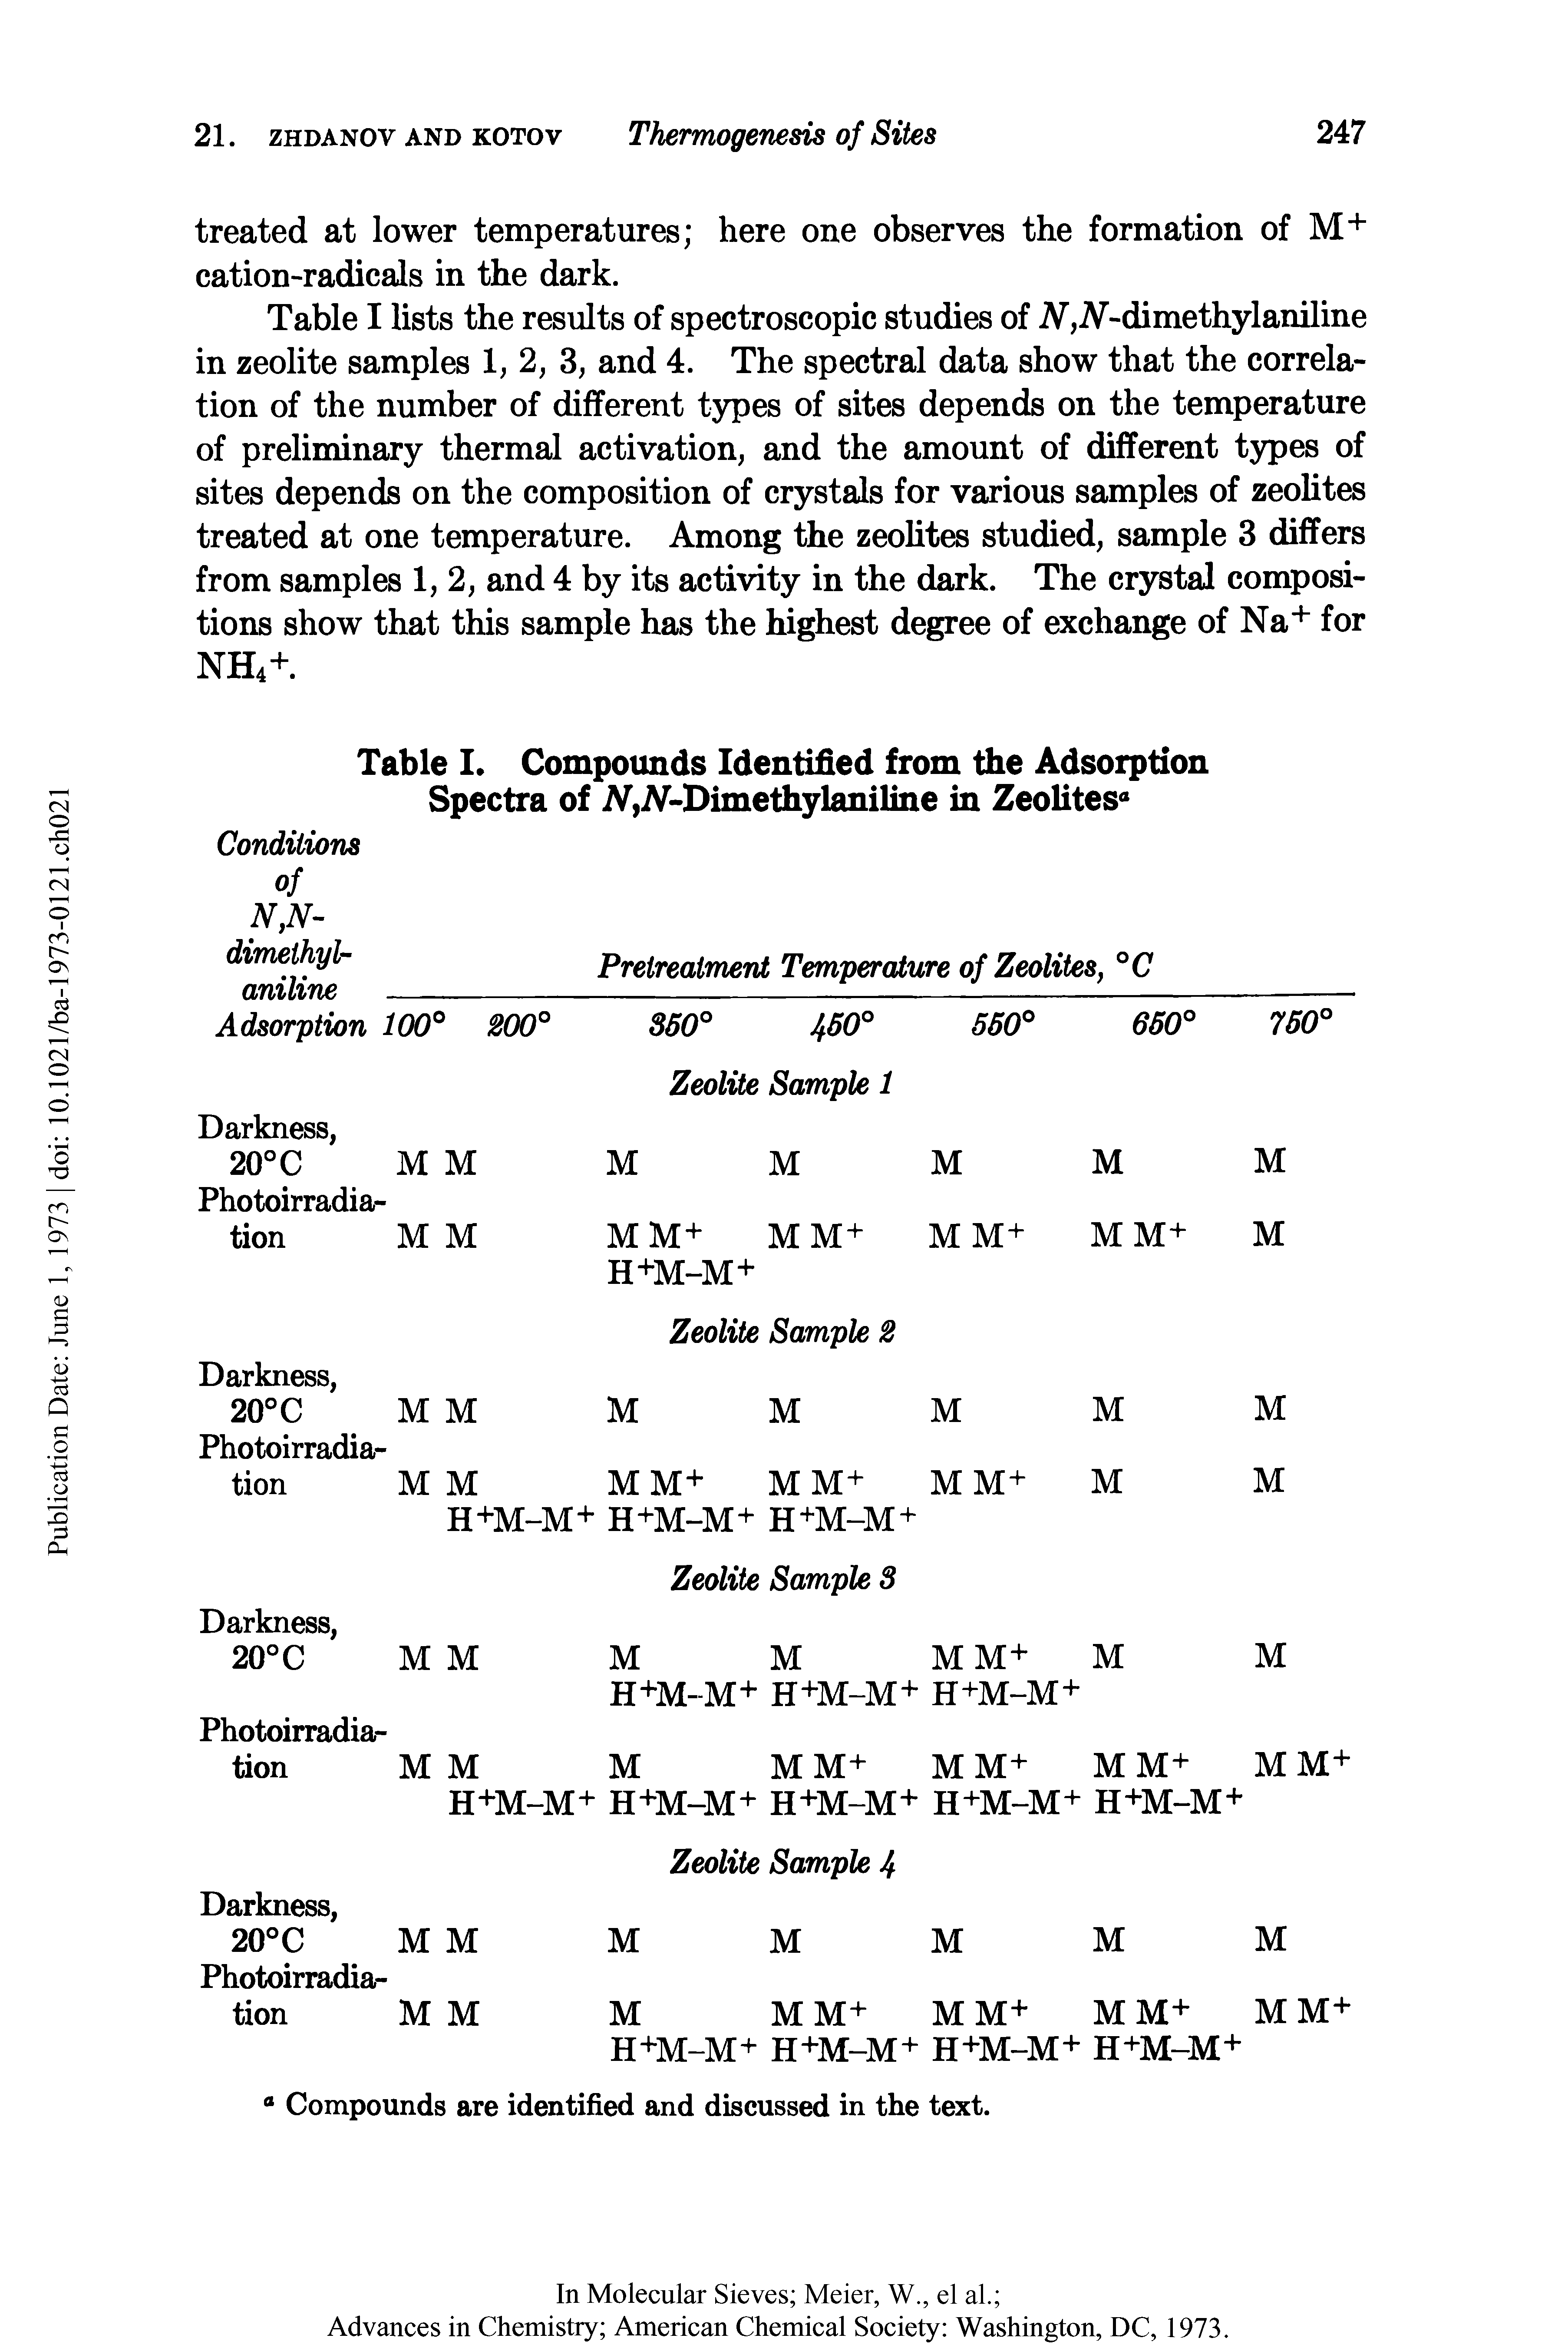 Table I lists the results of spectroscopic studies of iV,iV-dimethylaniline in zeolite samples 1, 2, 3, and 4. The spectral data show that the correlation of the number of different types of sites depends on the temperature of preliminary thermal activation, and the amount of different types of sites depends on the composition of crystals for various samples of zeolites treated at one temperature. Among the zeolites studied, sample 3 differs from samples 1,2, and 4 by its activity in the dark. The crystal compositions show that this sample has the highest degree of exchange of Na+ for NH4+.